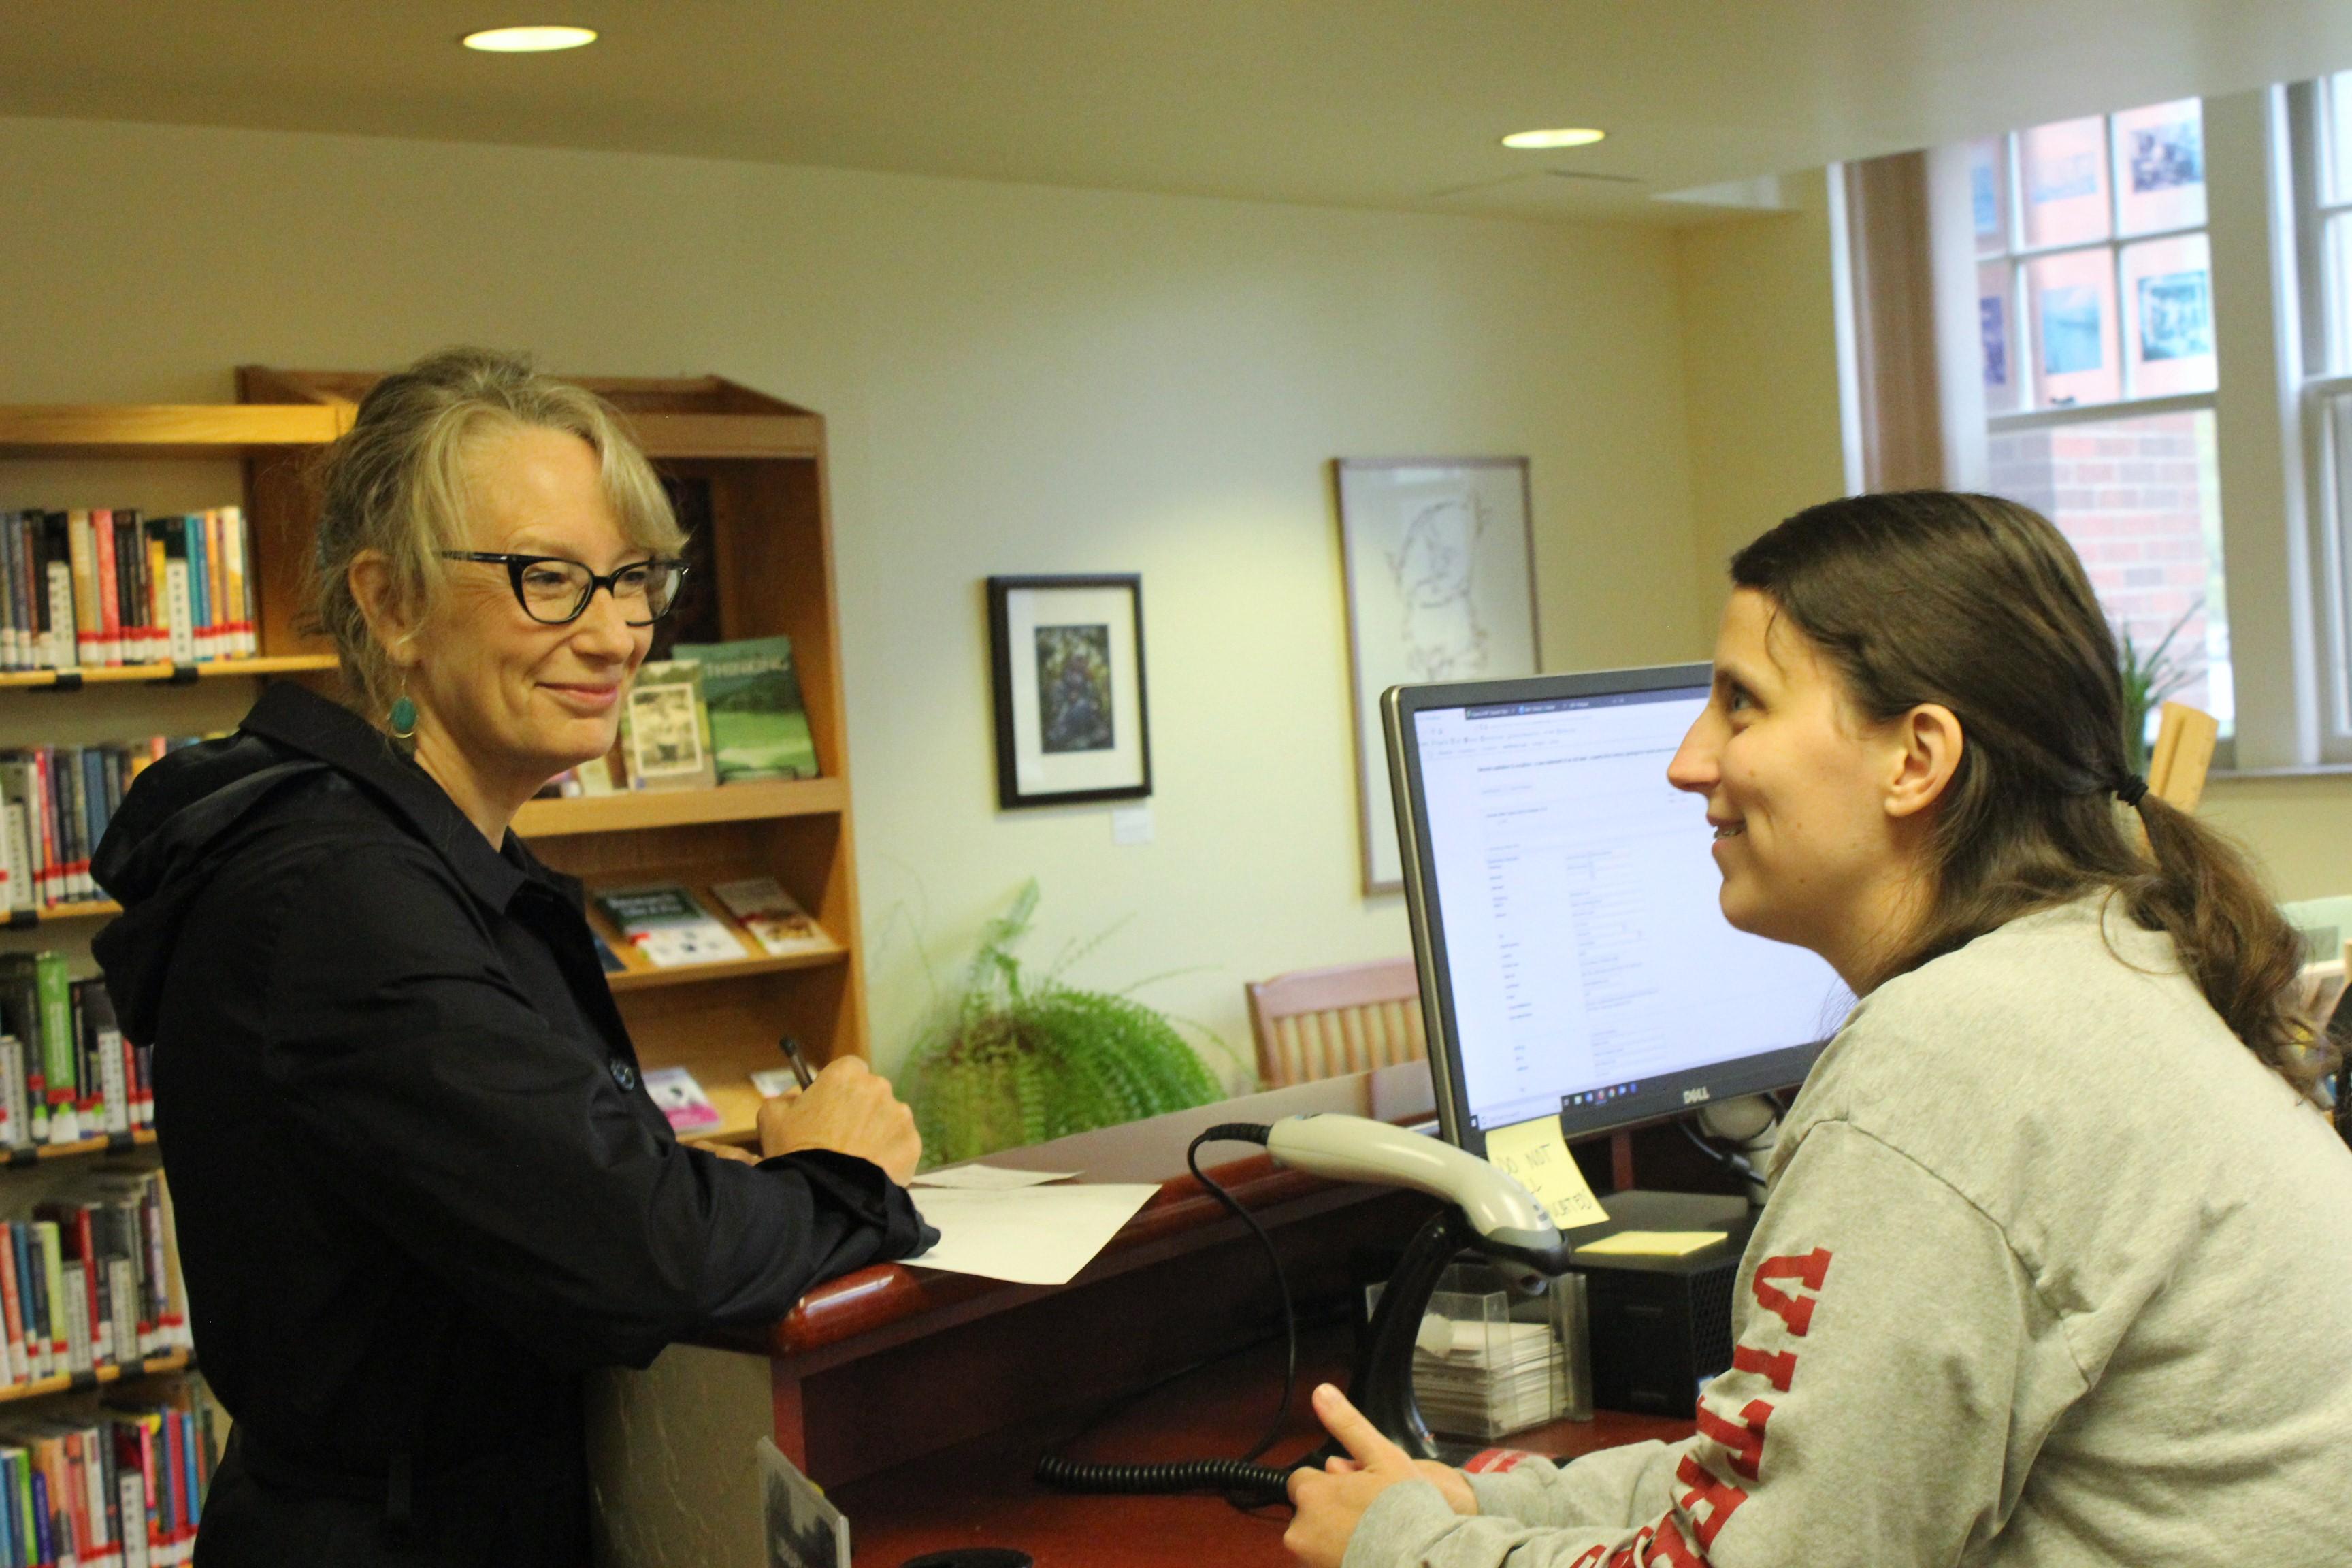 Caitlyn Konze helps a student at the circulation desk